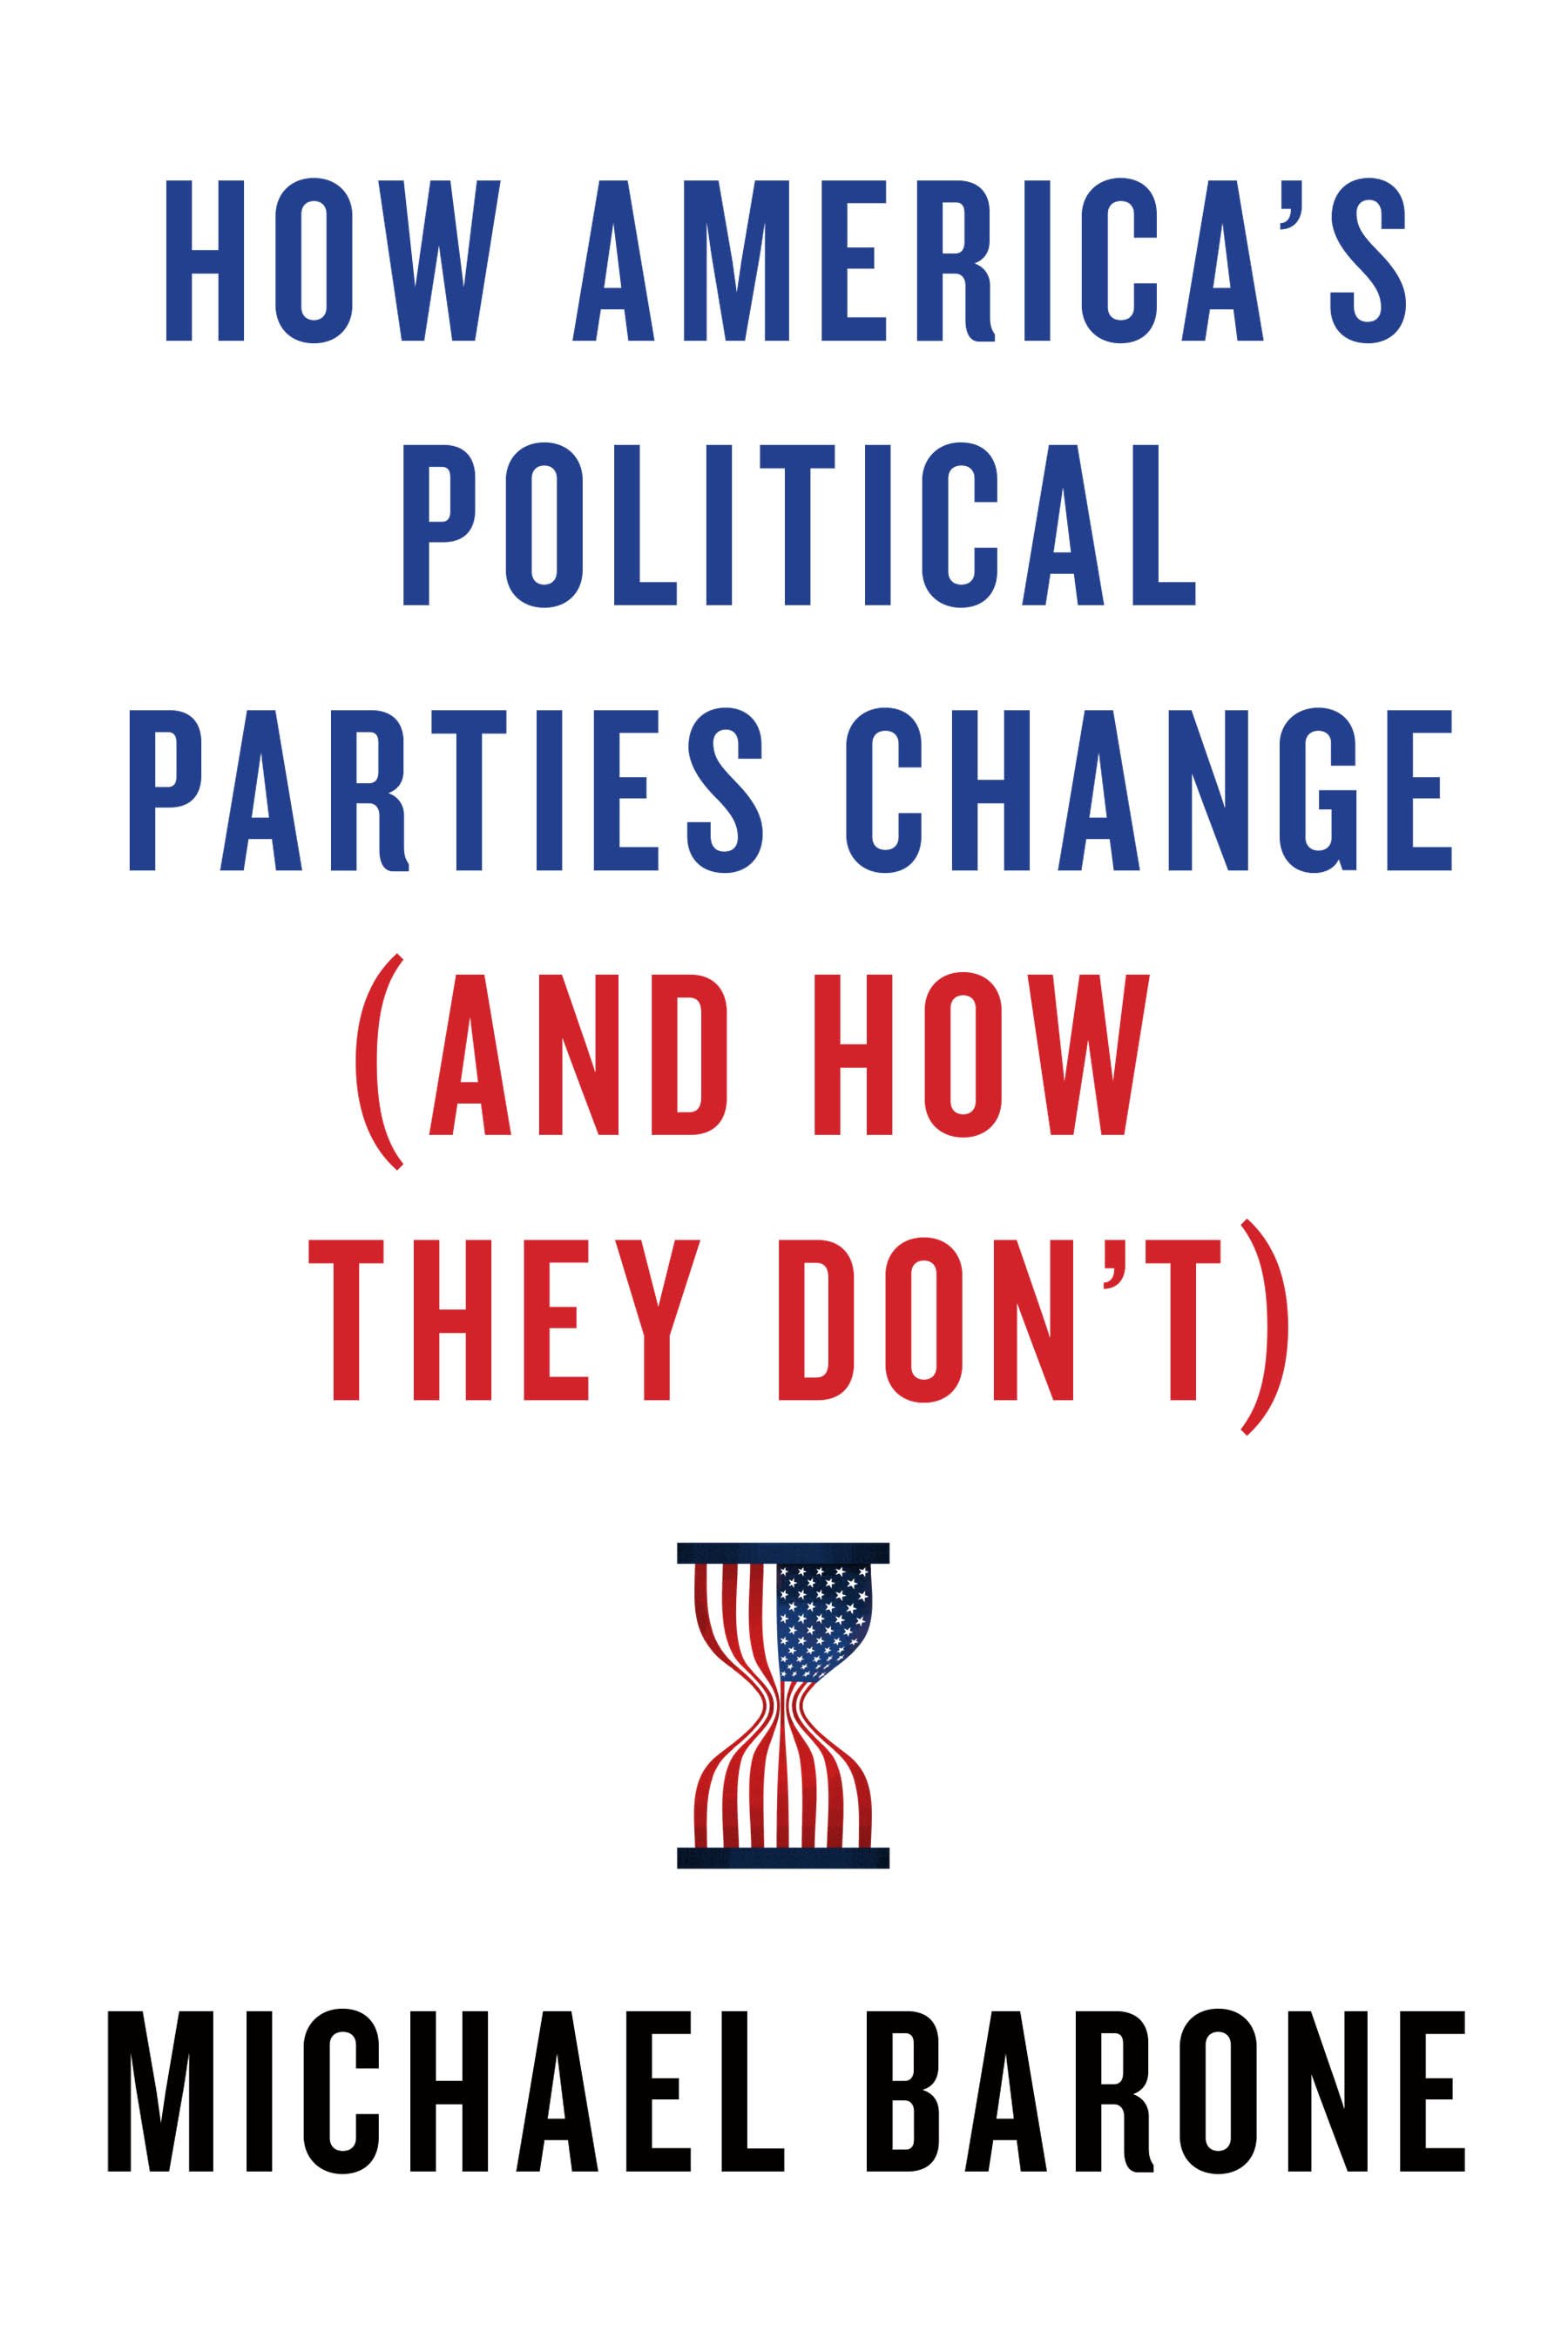 Book cover image for Michael Barone's latest work, "How America's Political Parties Change (And How They Don't)